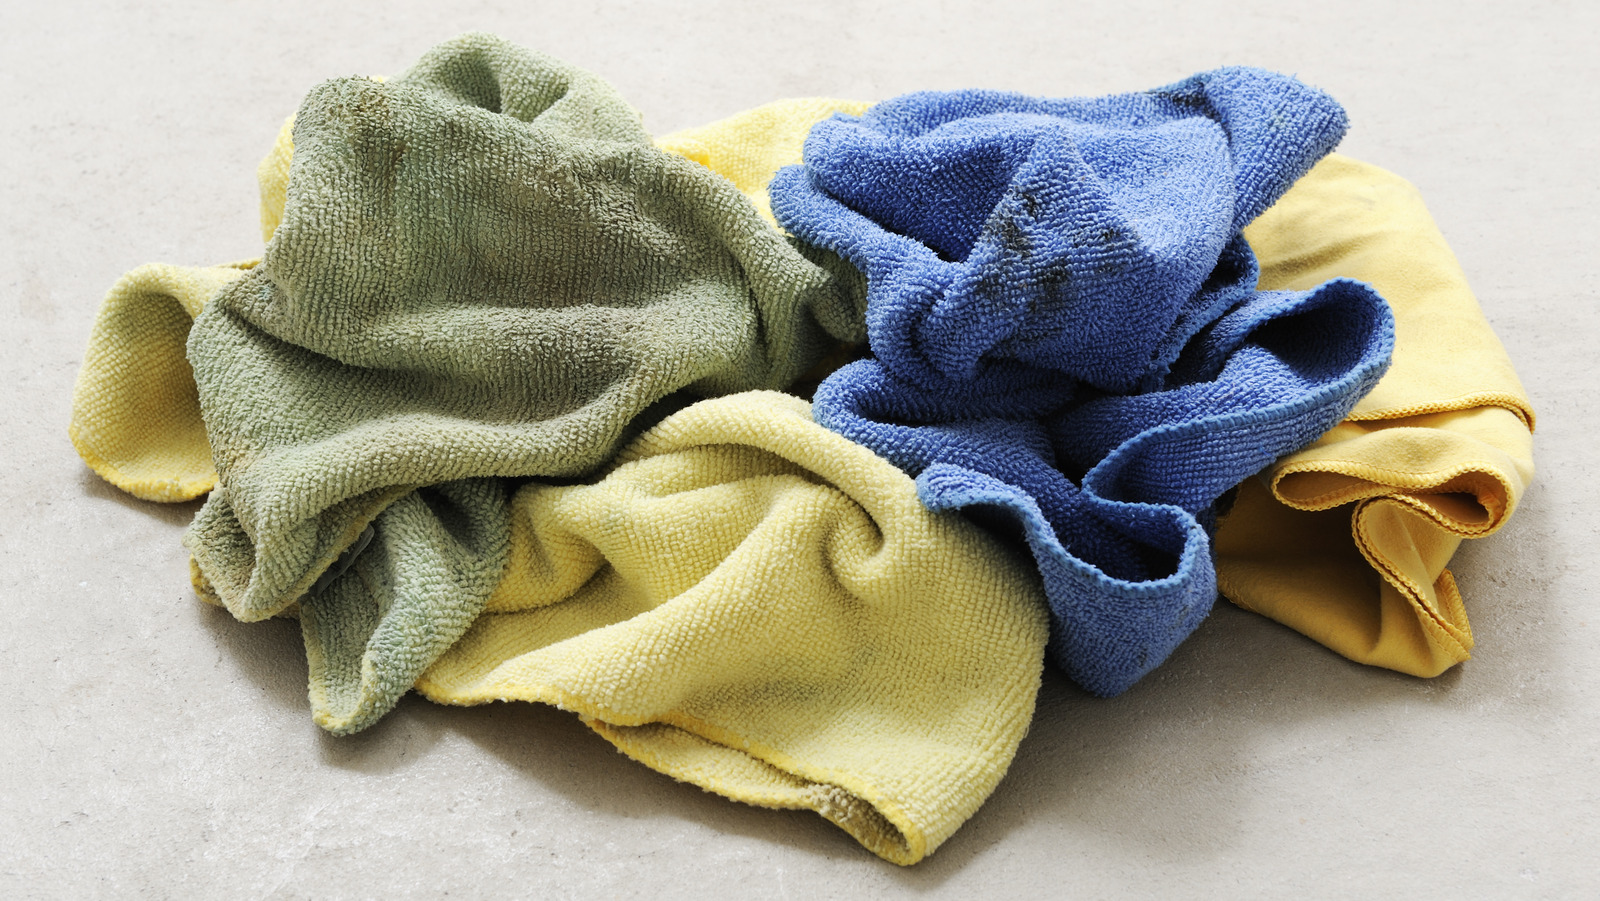 Cute + function = a new microfiber hand towel you'll WANT to